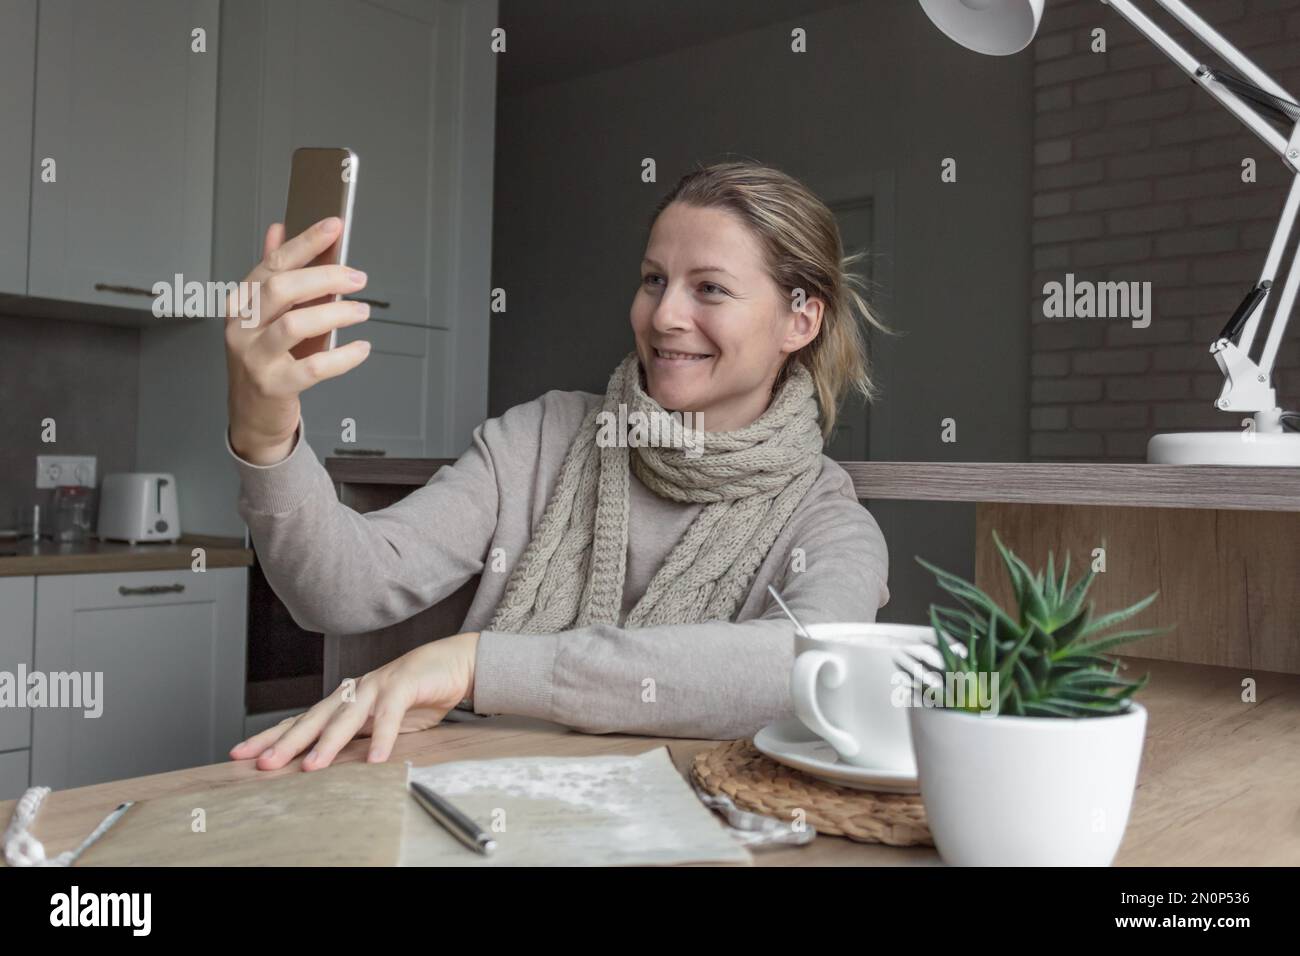 A woman in a sweater and a knitted scarf in the kitchen sits at a wooden table and talks on a video call on the phone. Stock Photo